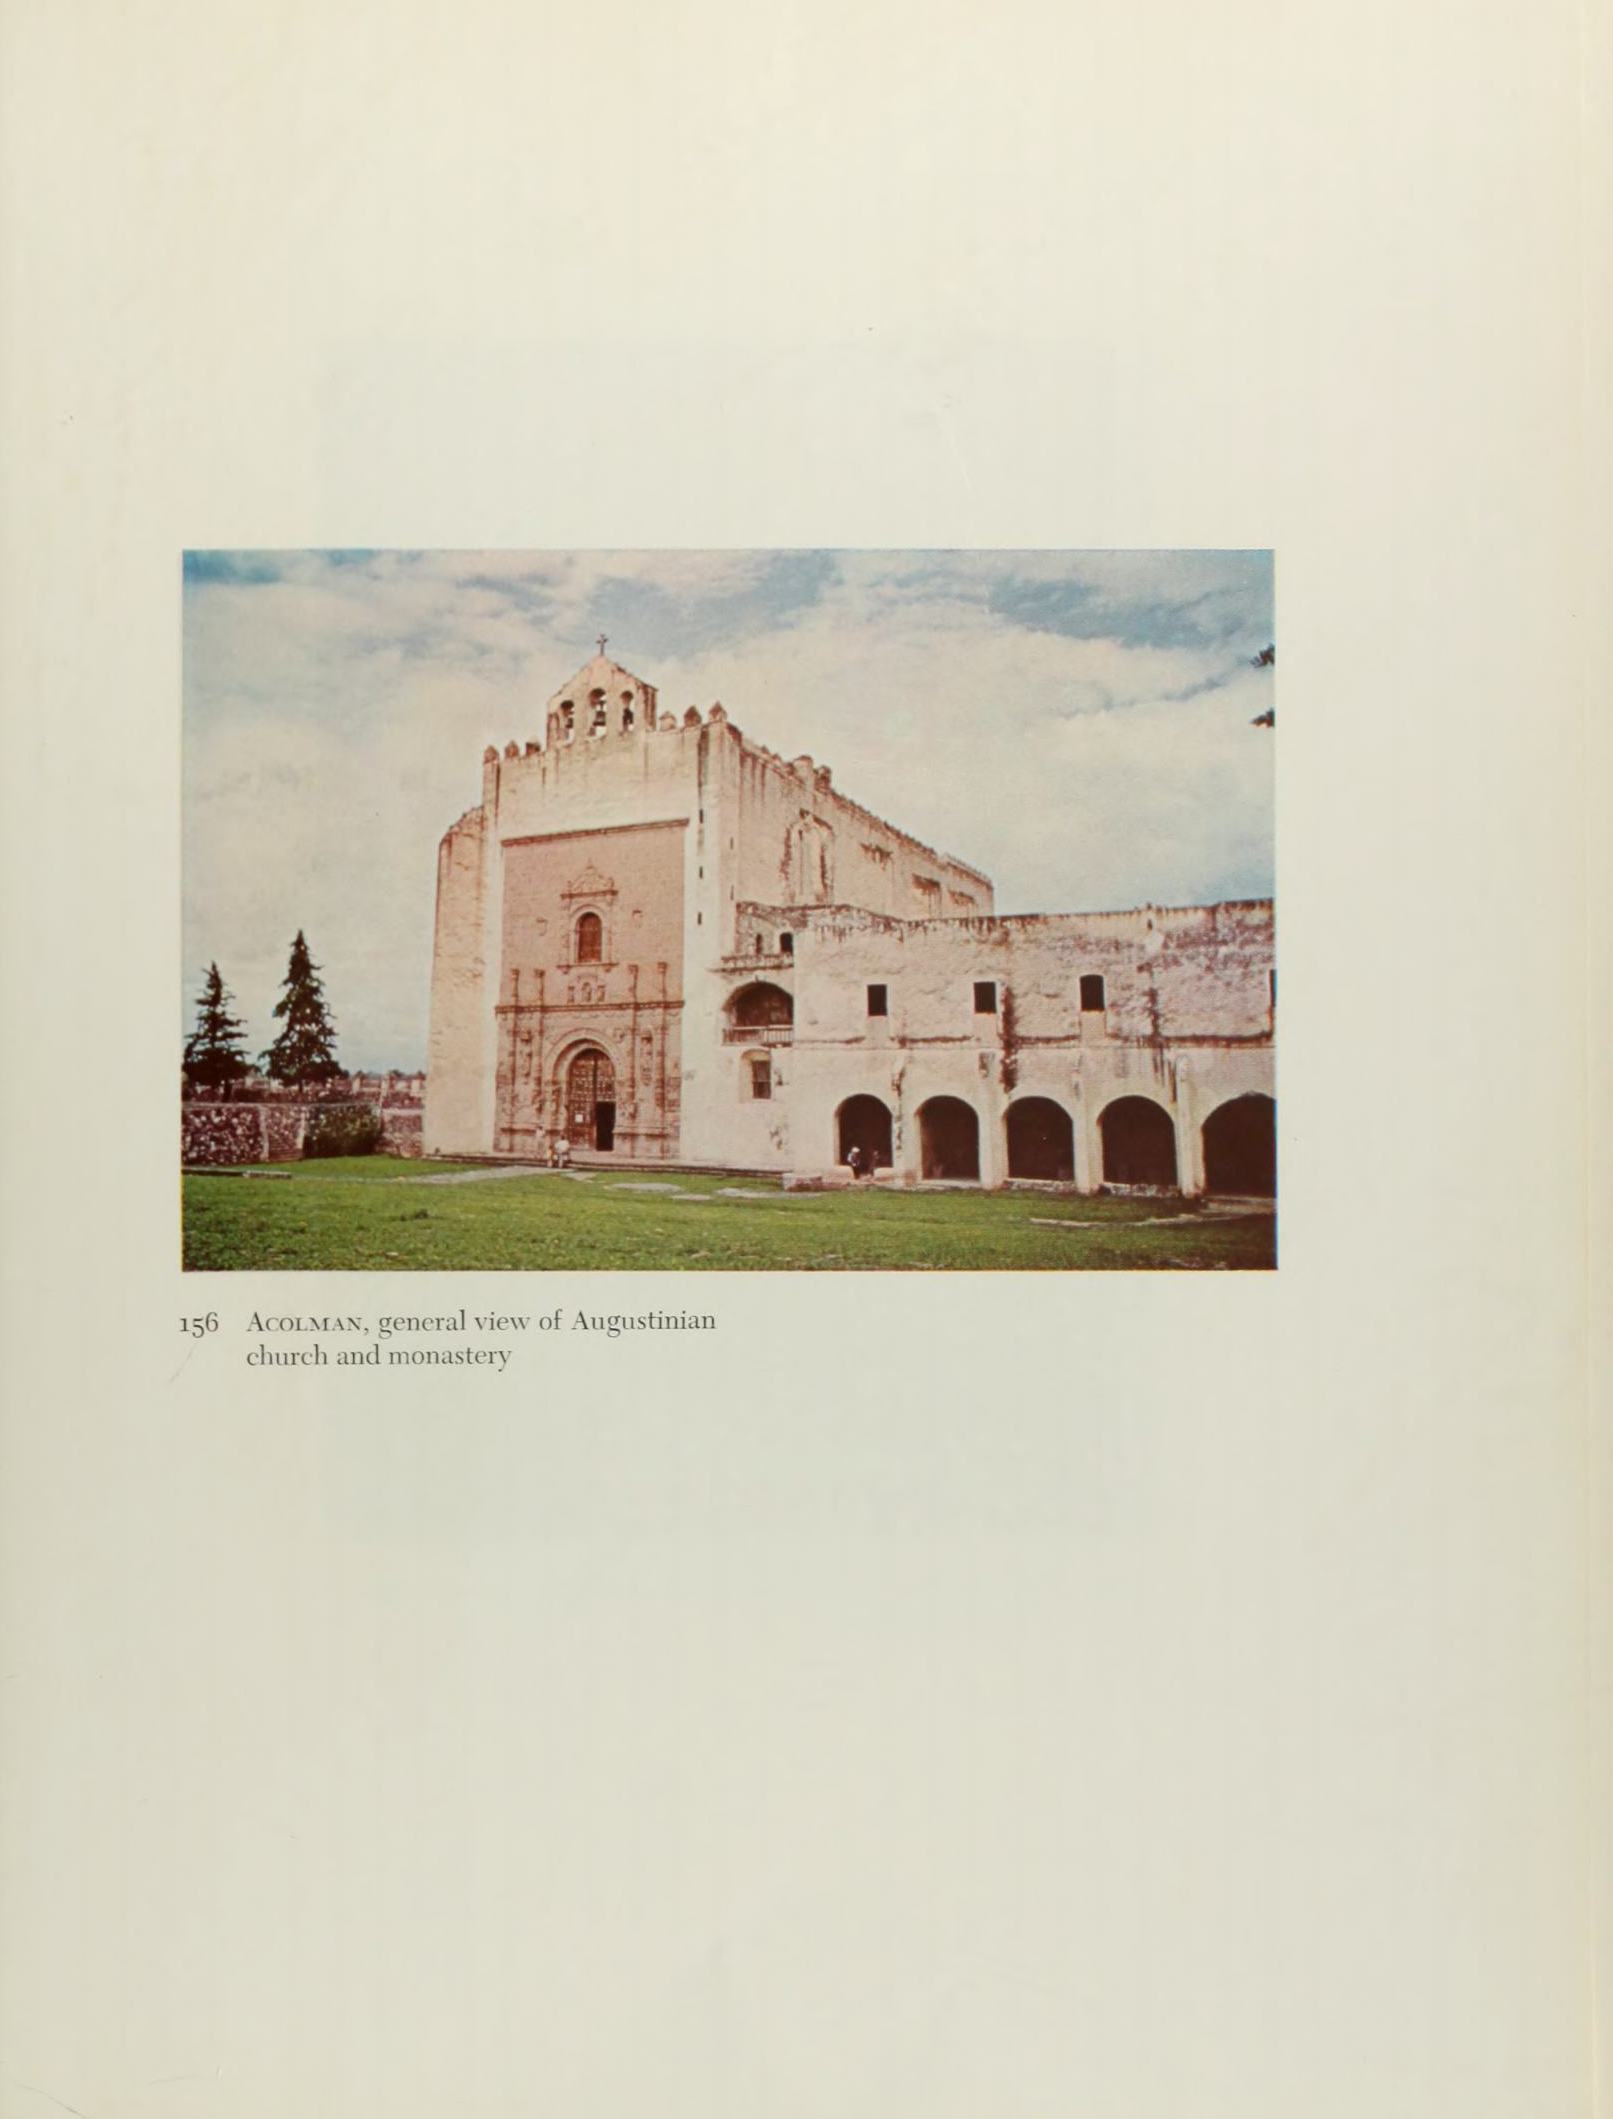 The Churches of Mexico. 1530–1810 / by Joseph Armstrong Baird, jr. ; photographs by Hugo Rudinger. — Berkley and Los Angeles : University of California Press, 1962